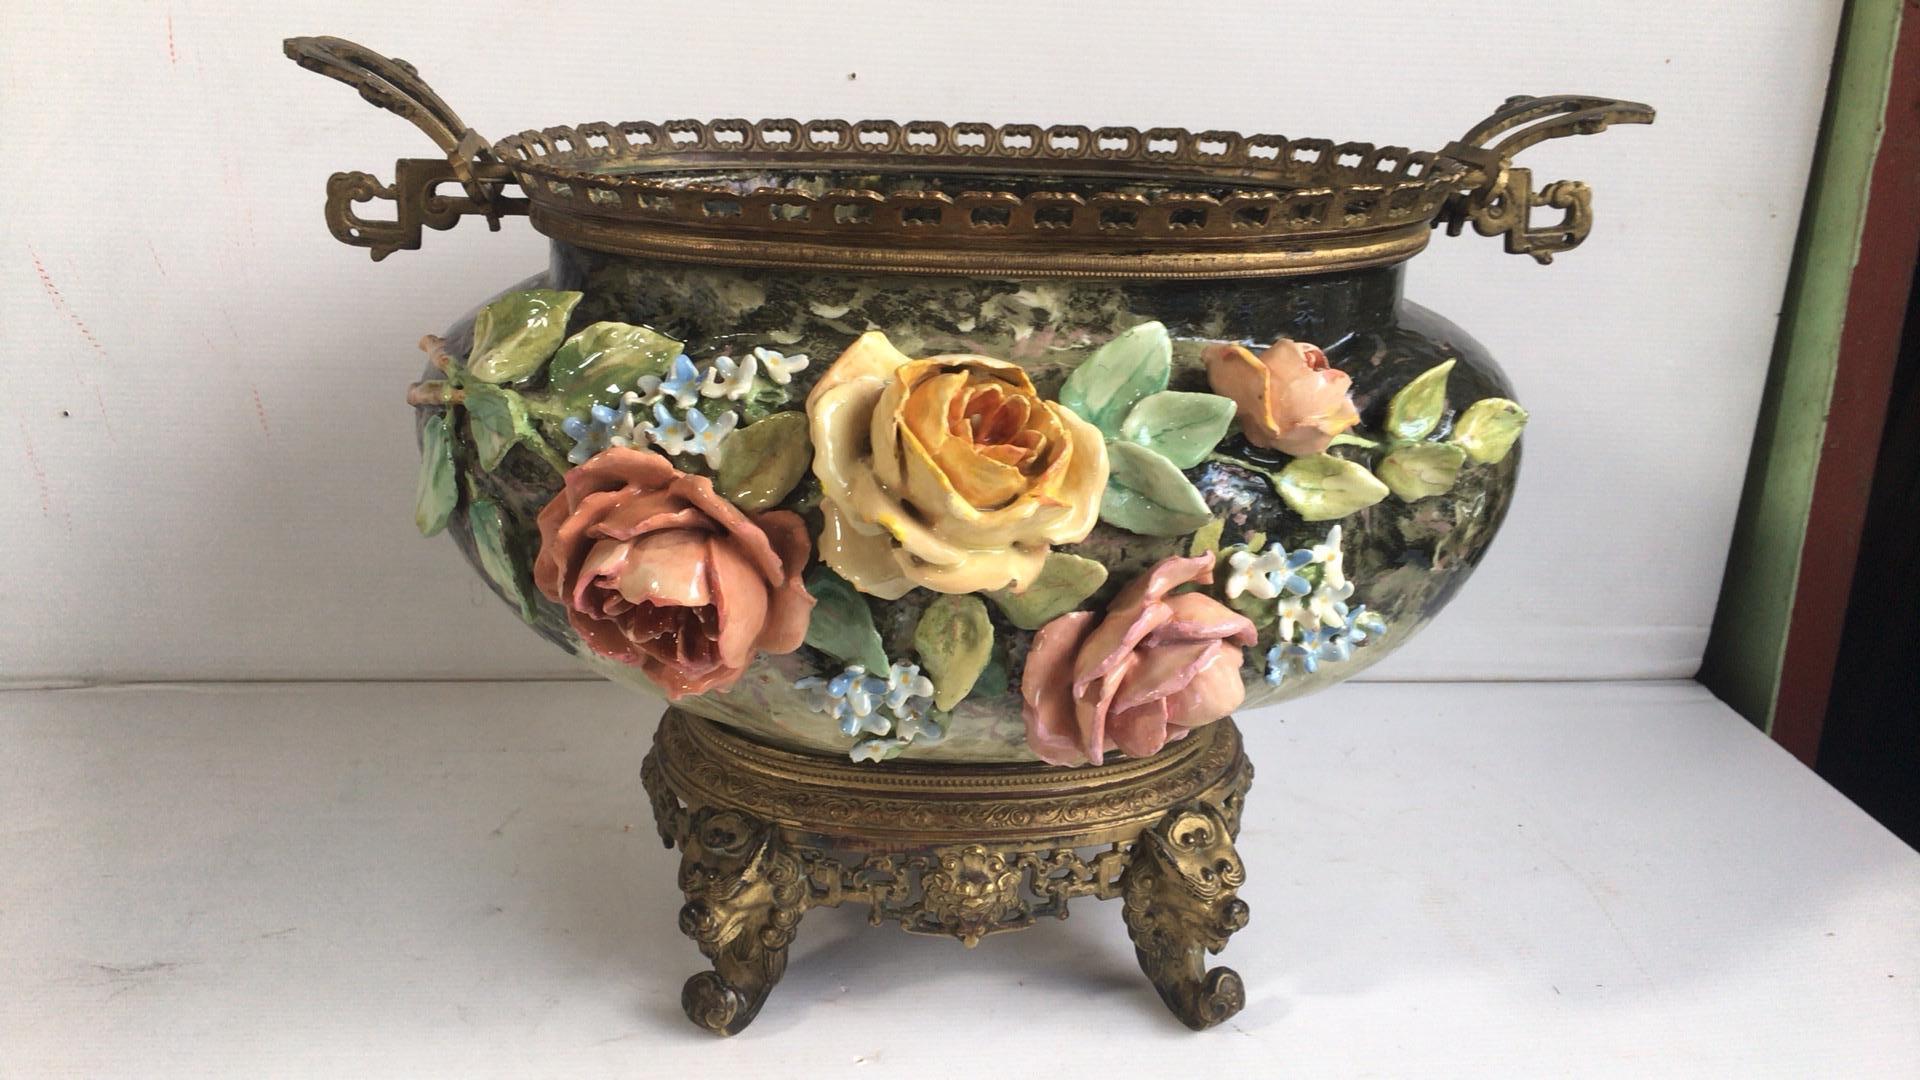 French Majolica jardinière with flowers signed EG Edouard Gilles, circa 1880.
Handles et feet in bronze.
Measure: 18 inches length.